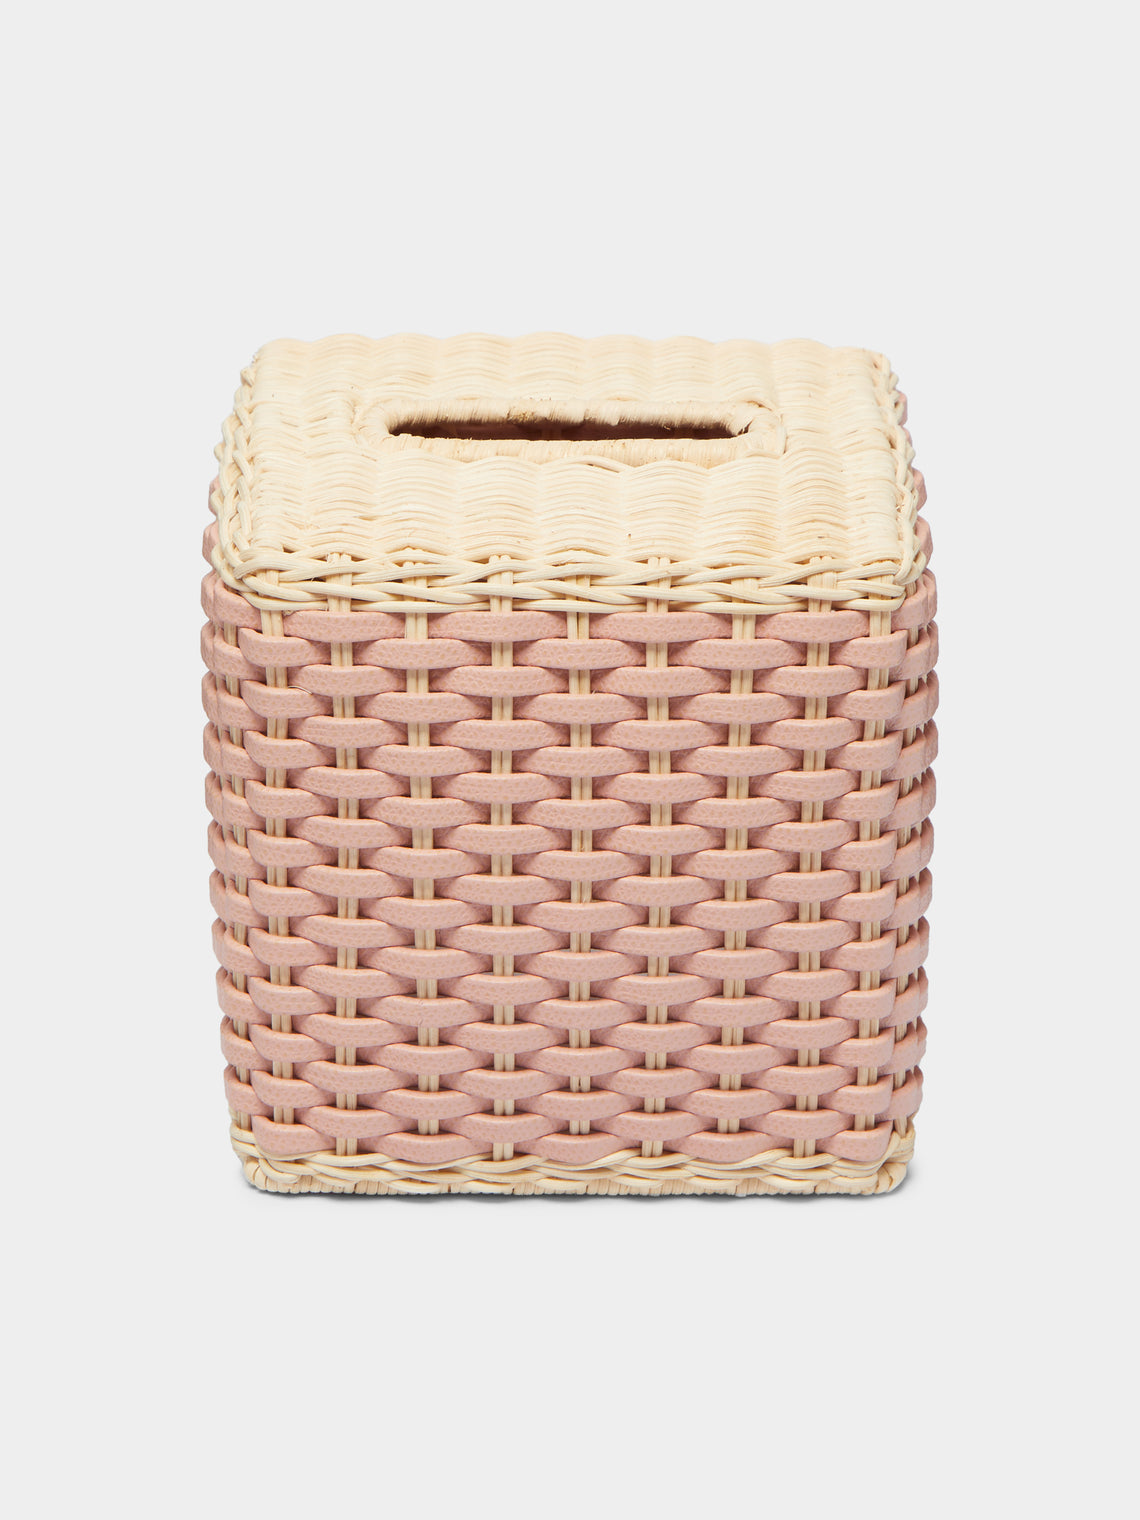 Giobagnara - Antibes Handwoven Leather and Rattan Tissue Box -  - ABASK - 